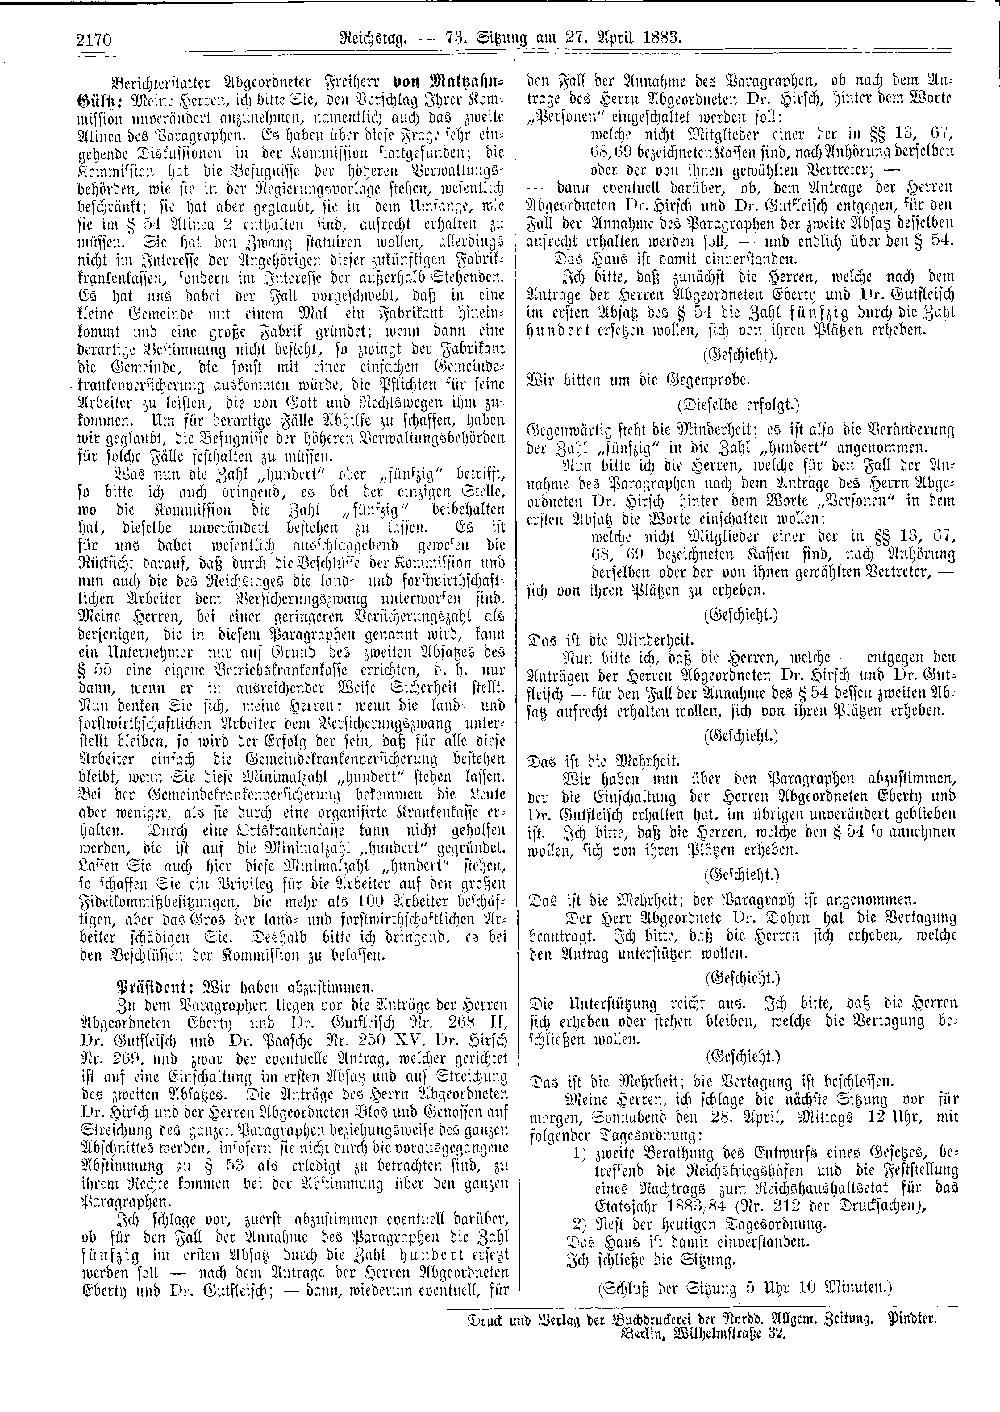 Scan of page 2170